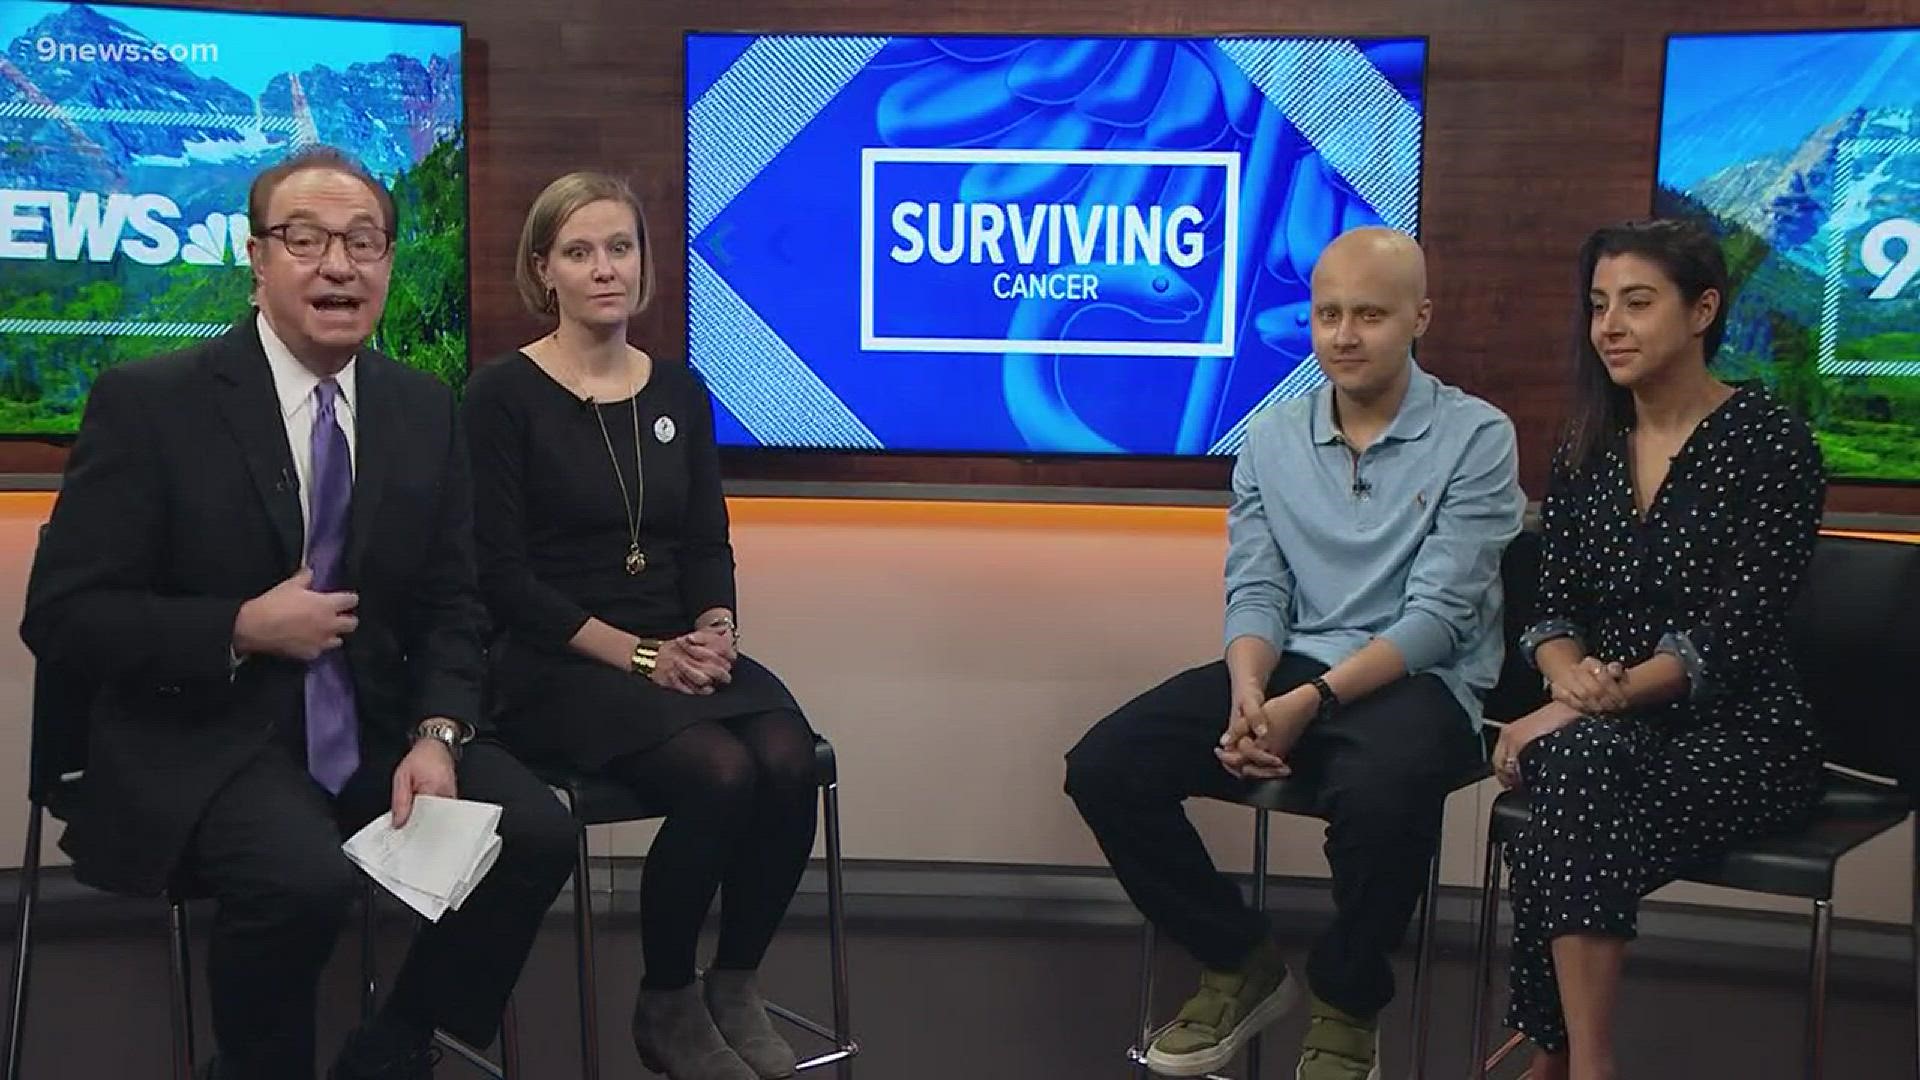 Joaquin, who is just 16 years old, just finished his cancer treatment at Children’s Hospital Colorado for Ewing’s Sarcoma. Joaquin and his mom, Valentina, talk about how cancer has affected the whole family. Dr. Cost, who is his treating doctor, talk about new advances in cancer treatment.